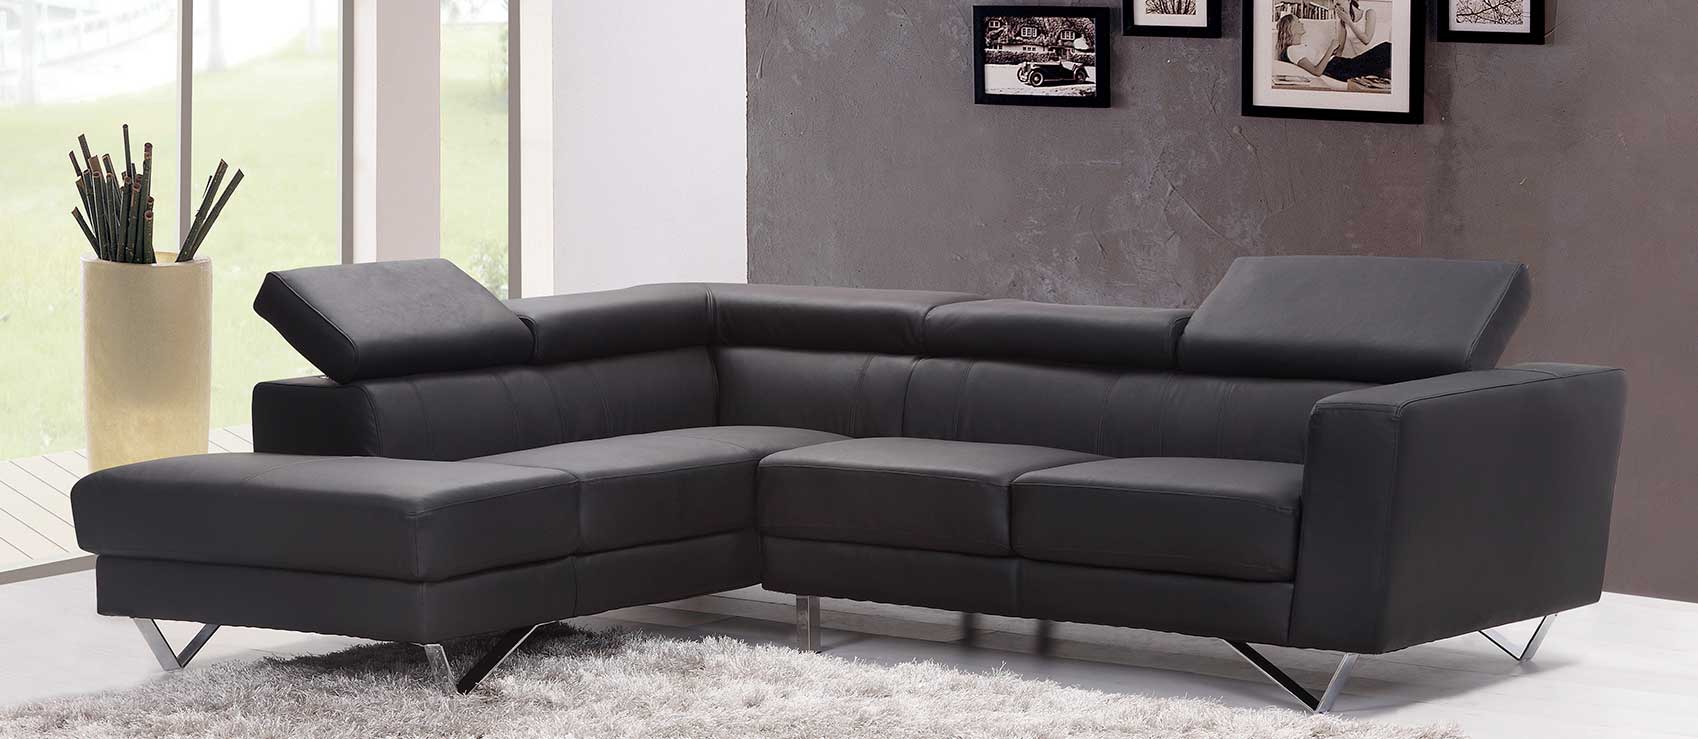 Value City Furniture Delivery On